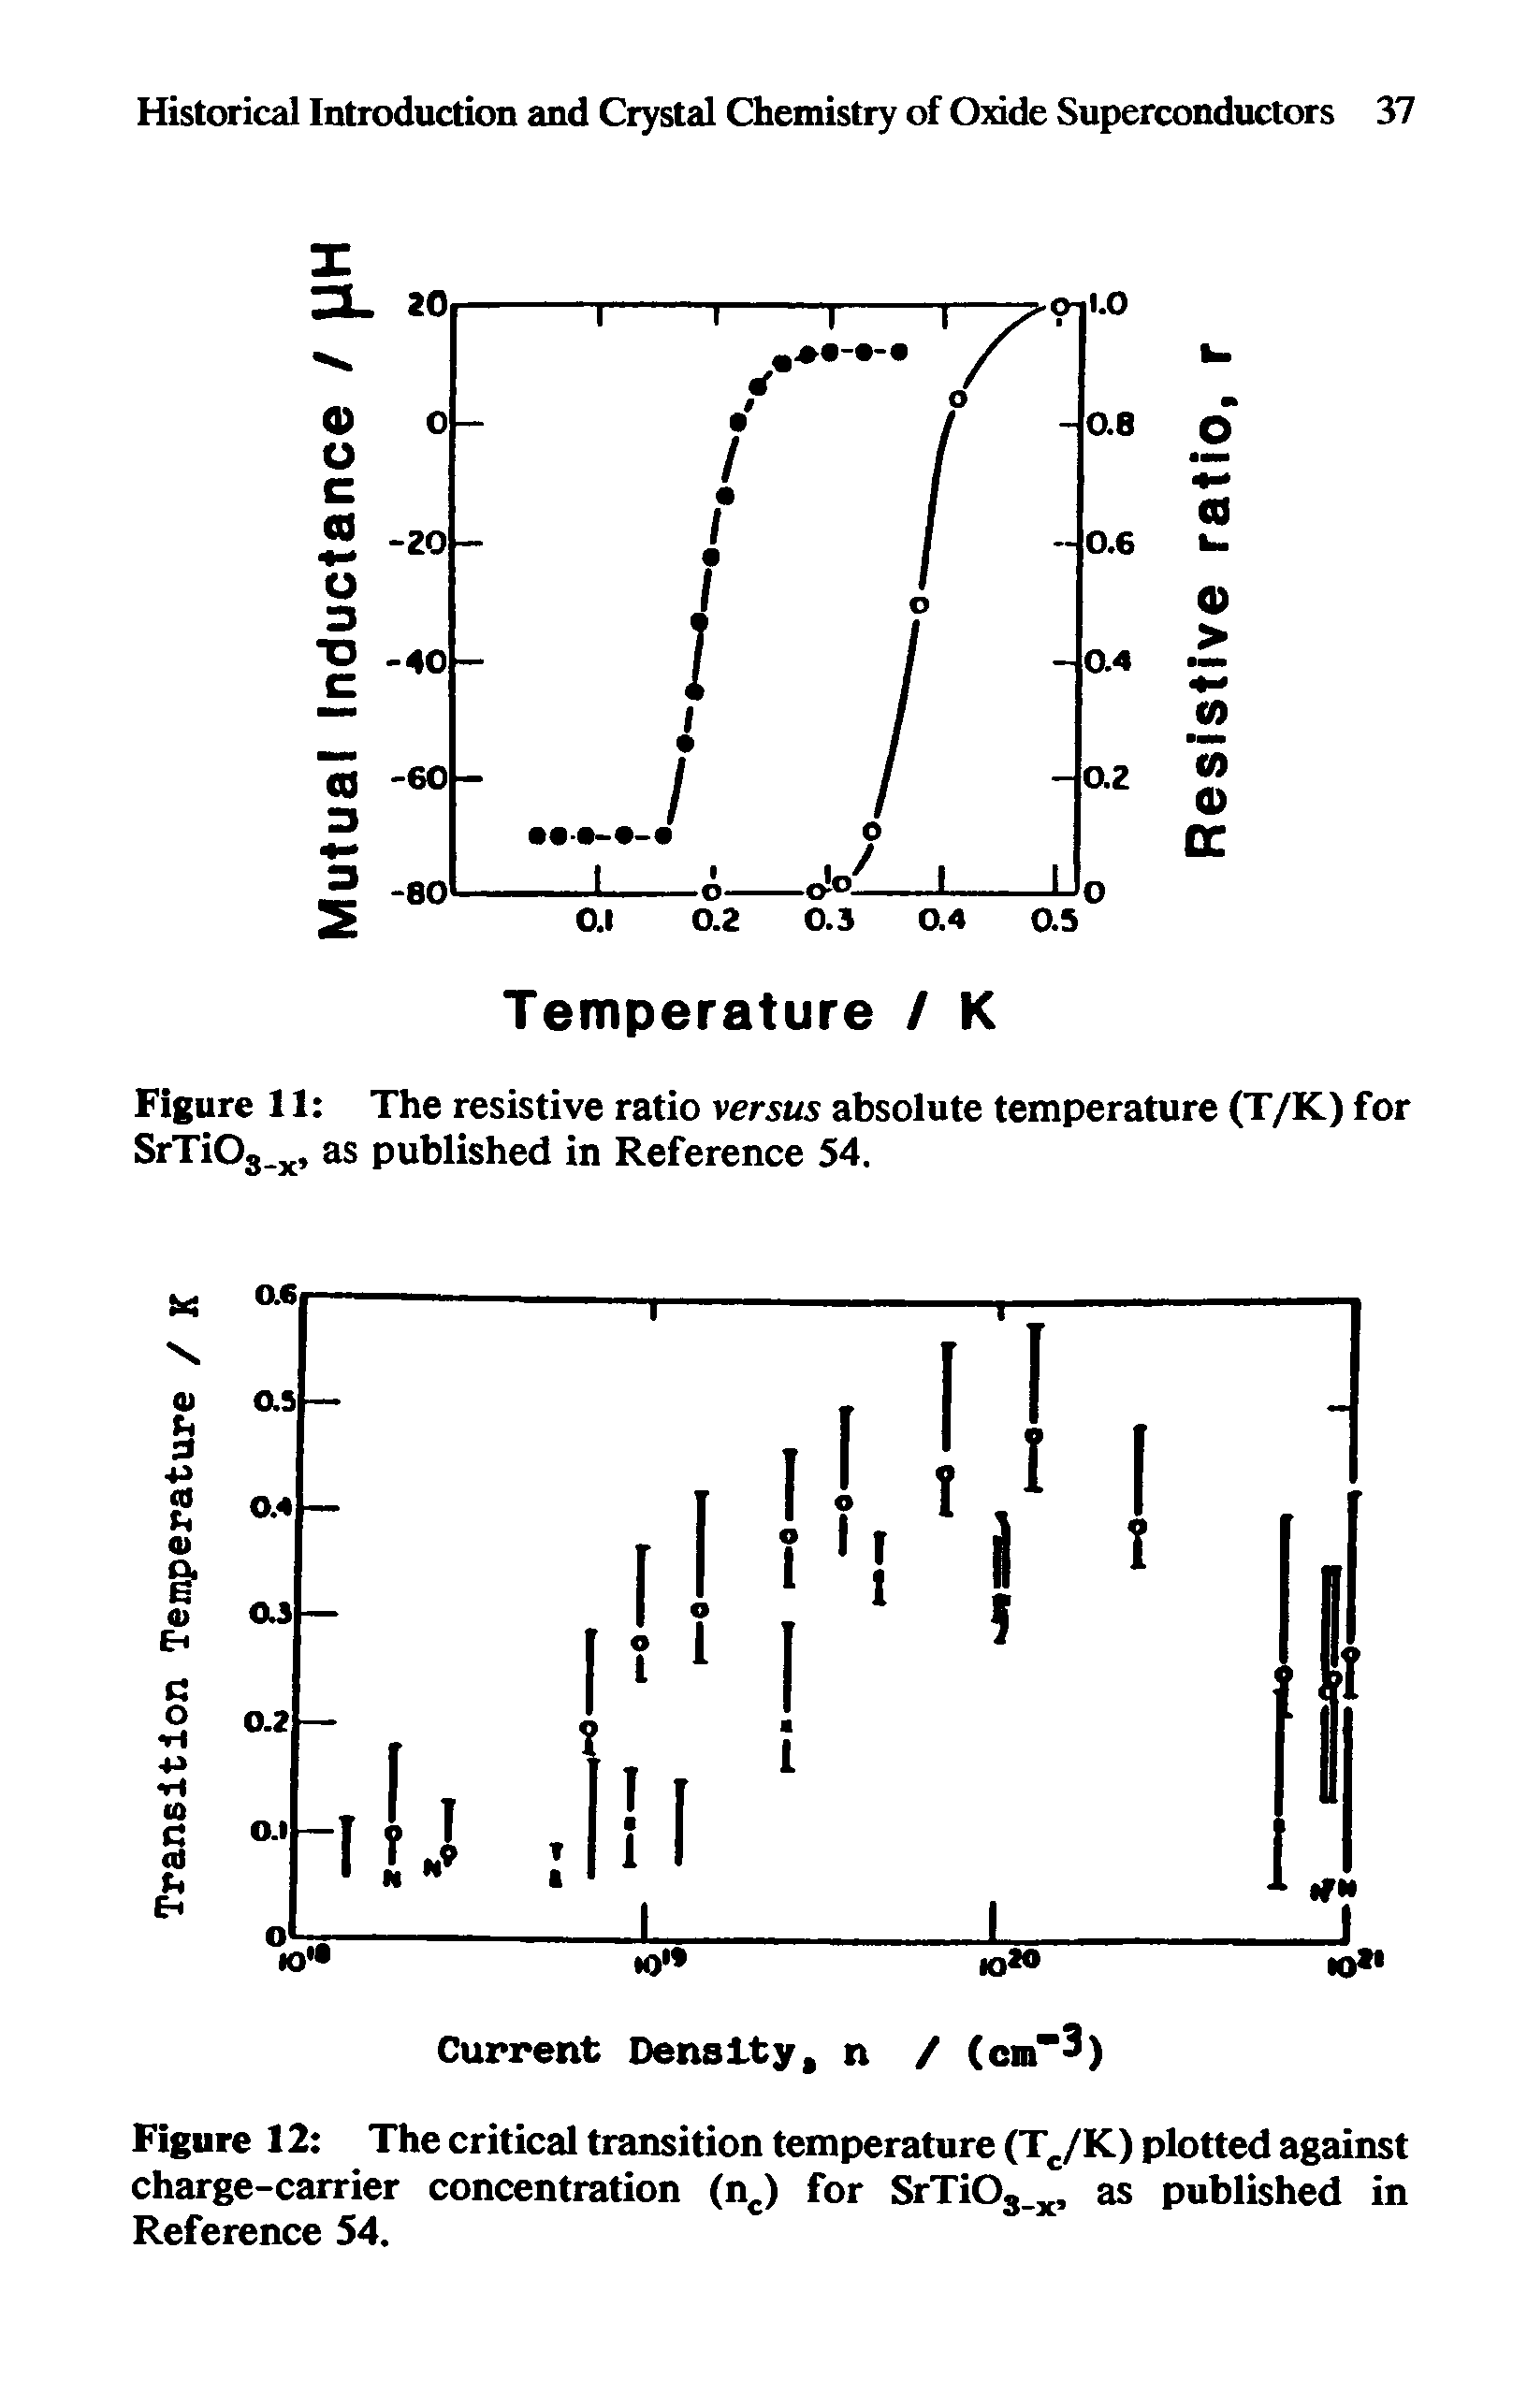 Figure 11 The resistive ratio versus absolute temperature (T/K) for SrTiOs x, as published in Reference 54.